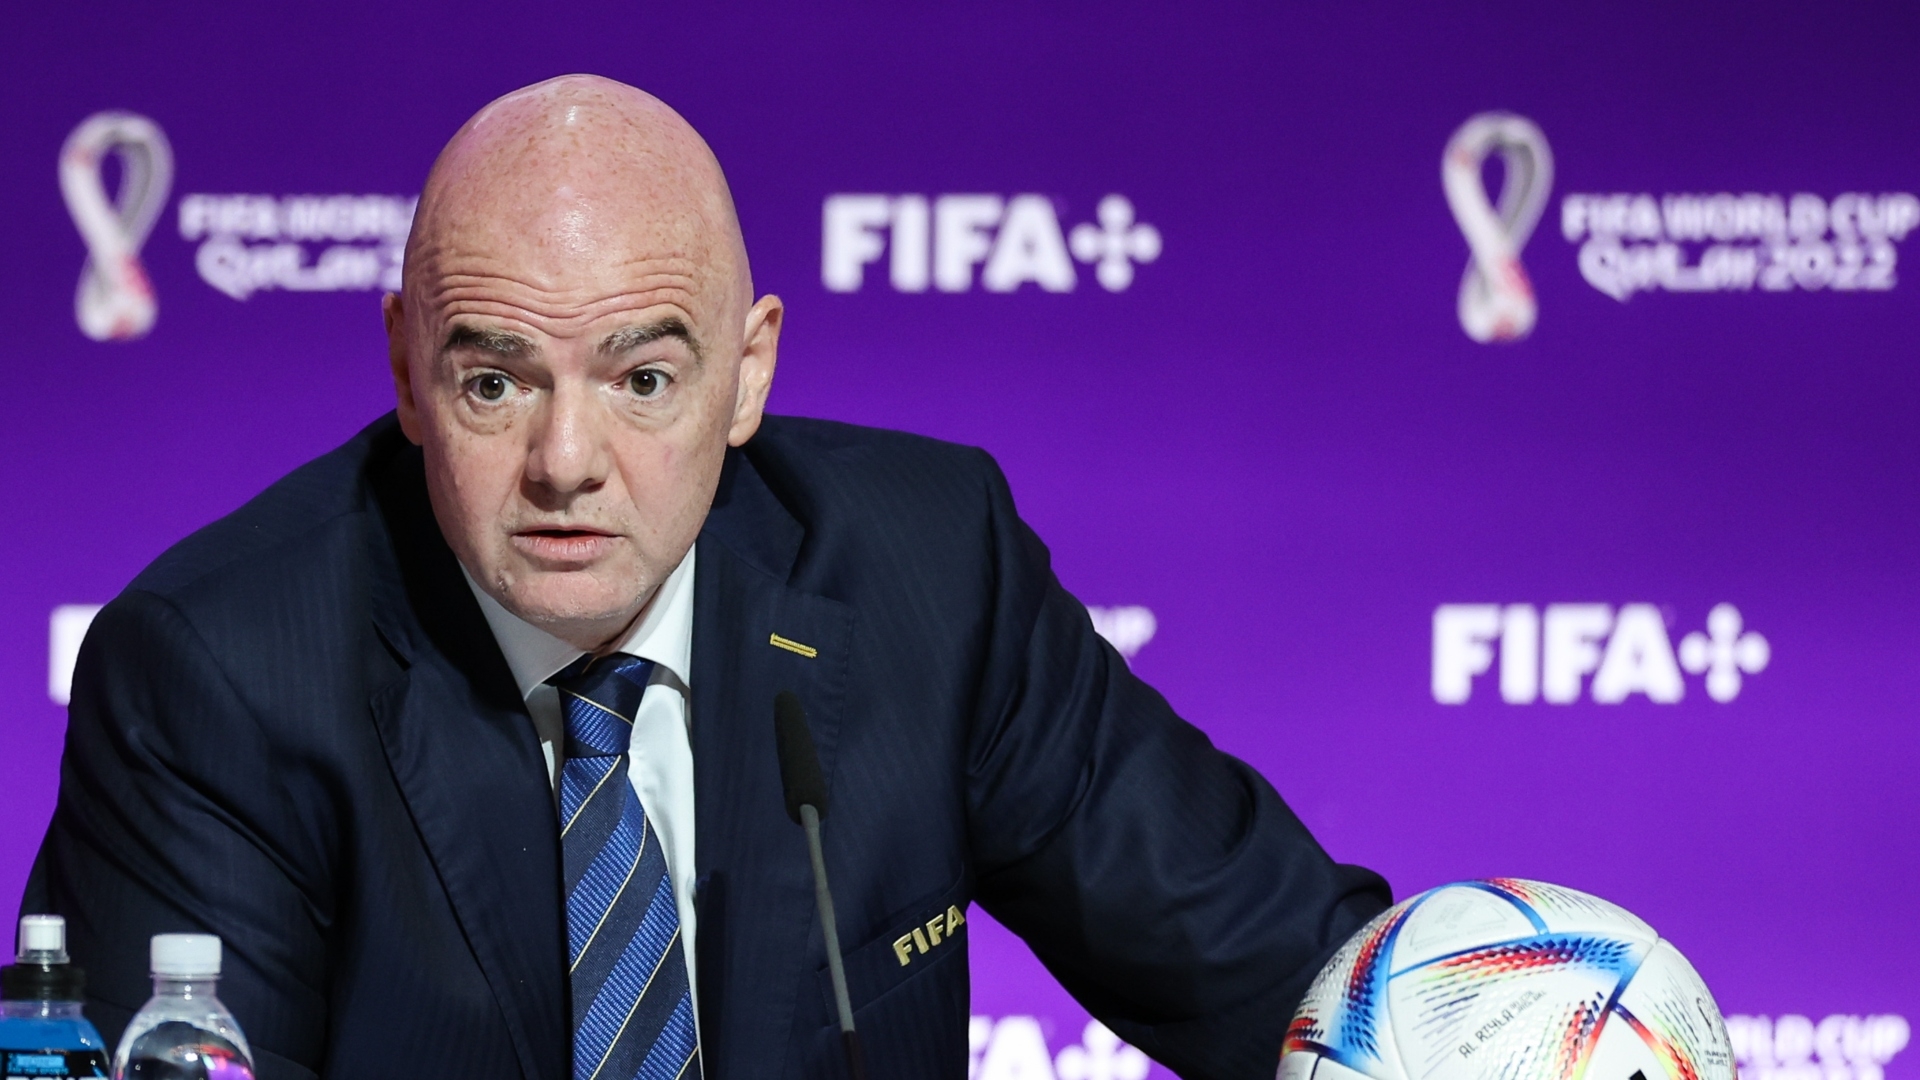 Infantino lashes out at Europe in speech ahead of the World Cup ...